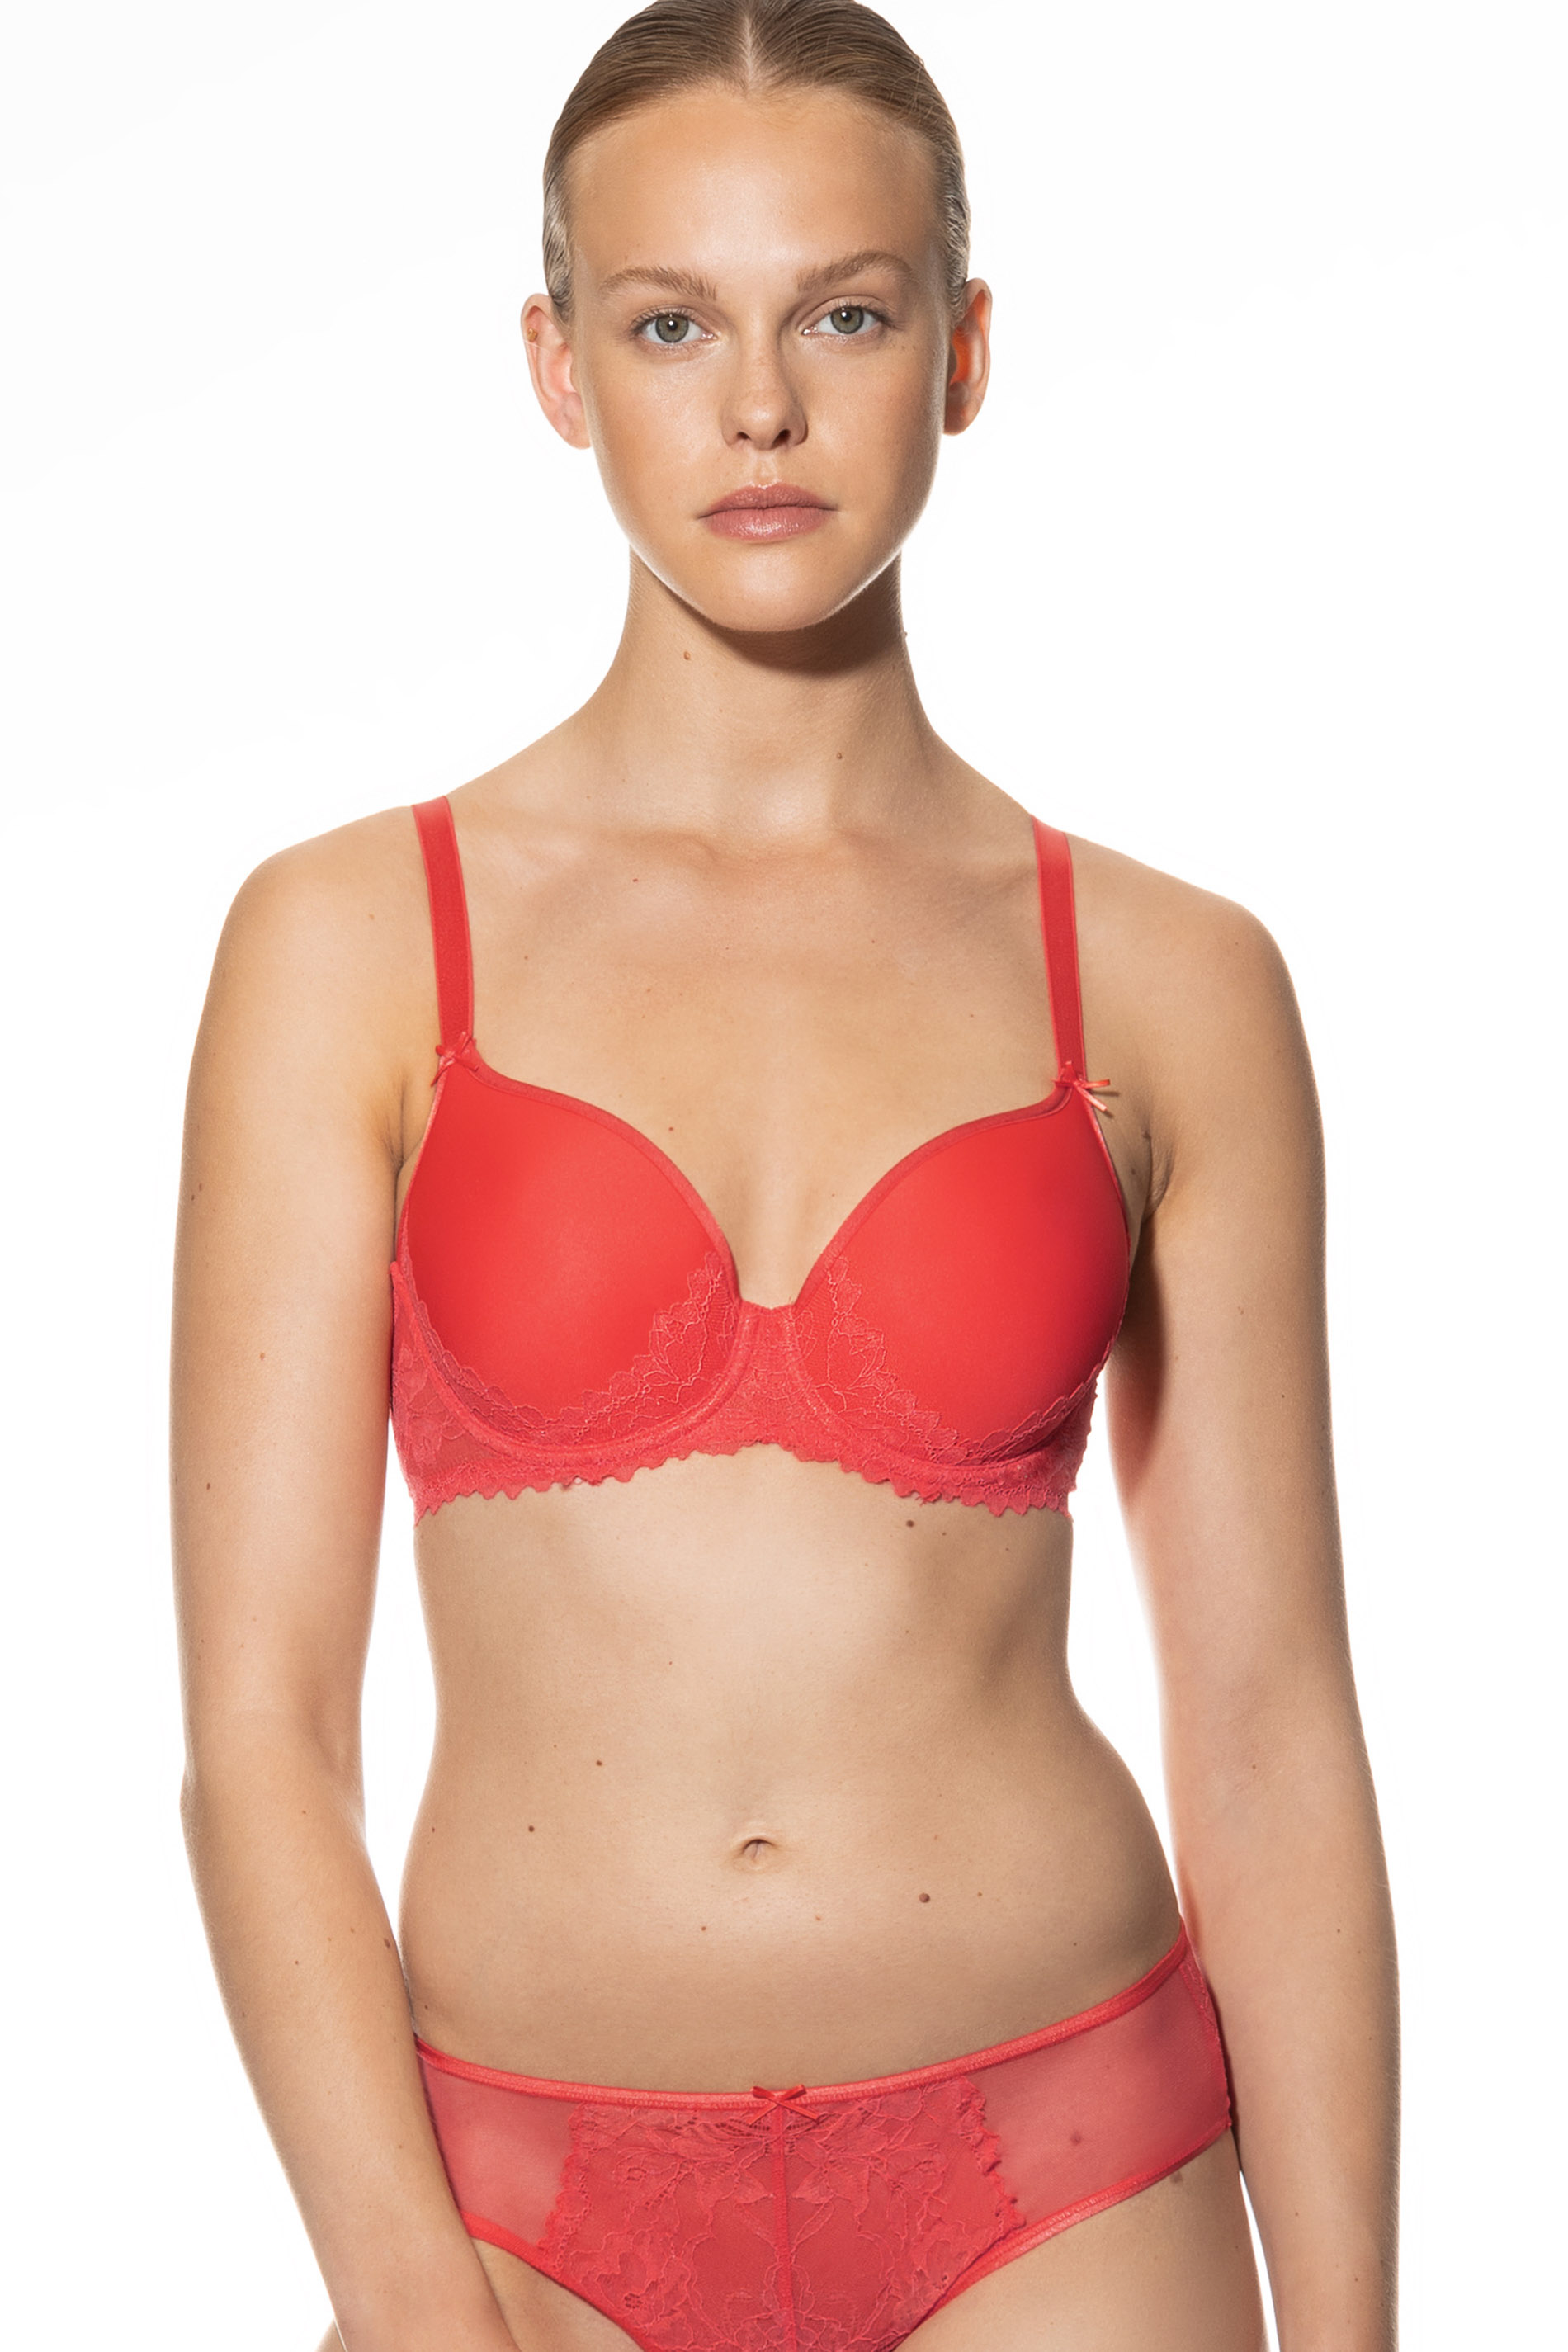 Spacer bra | Full Cup Serie Fabulous Front View | mey®